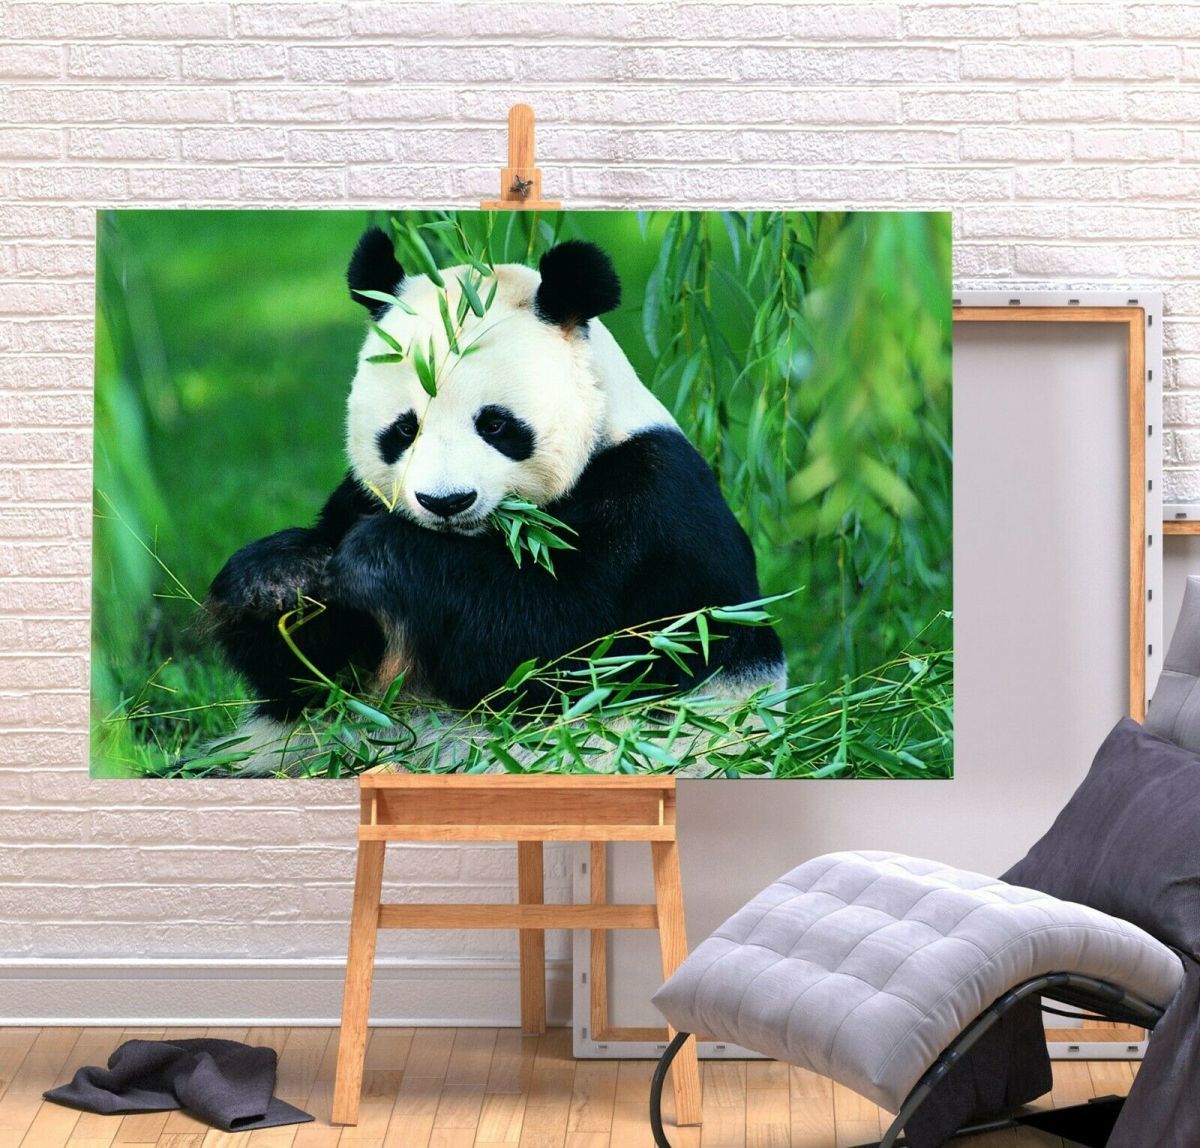 Panda High-end Canvas Frame Poster Picture A1 Art Panel Nordic Animal Animal Overseas Photo Goods Painting Miscellaneous Interior 1, Printed materials, Poster, others